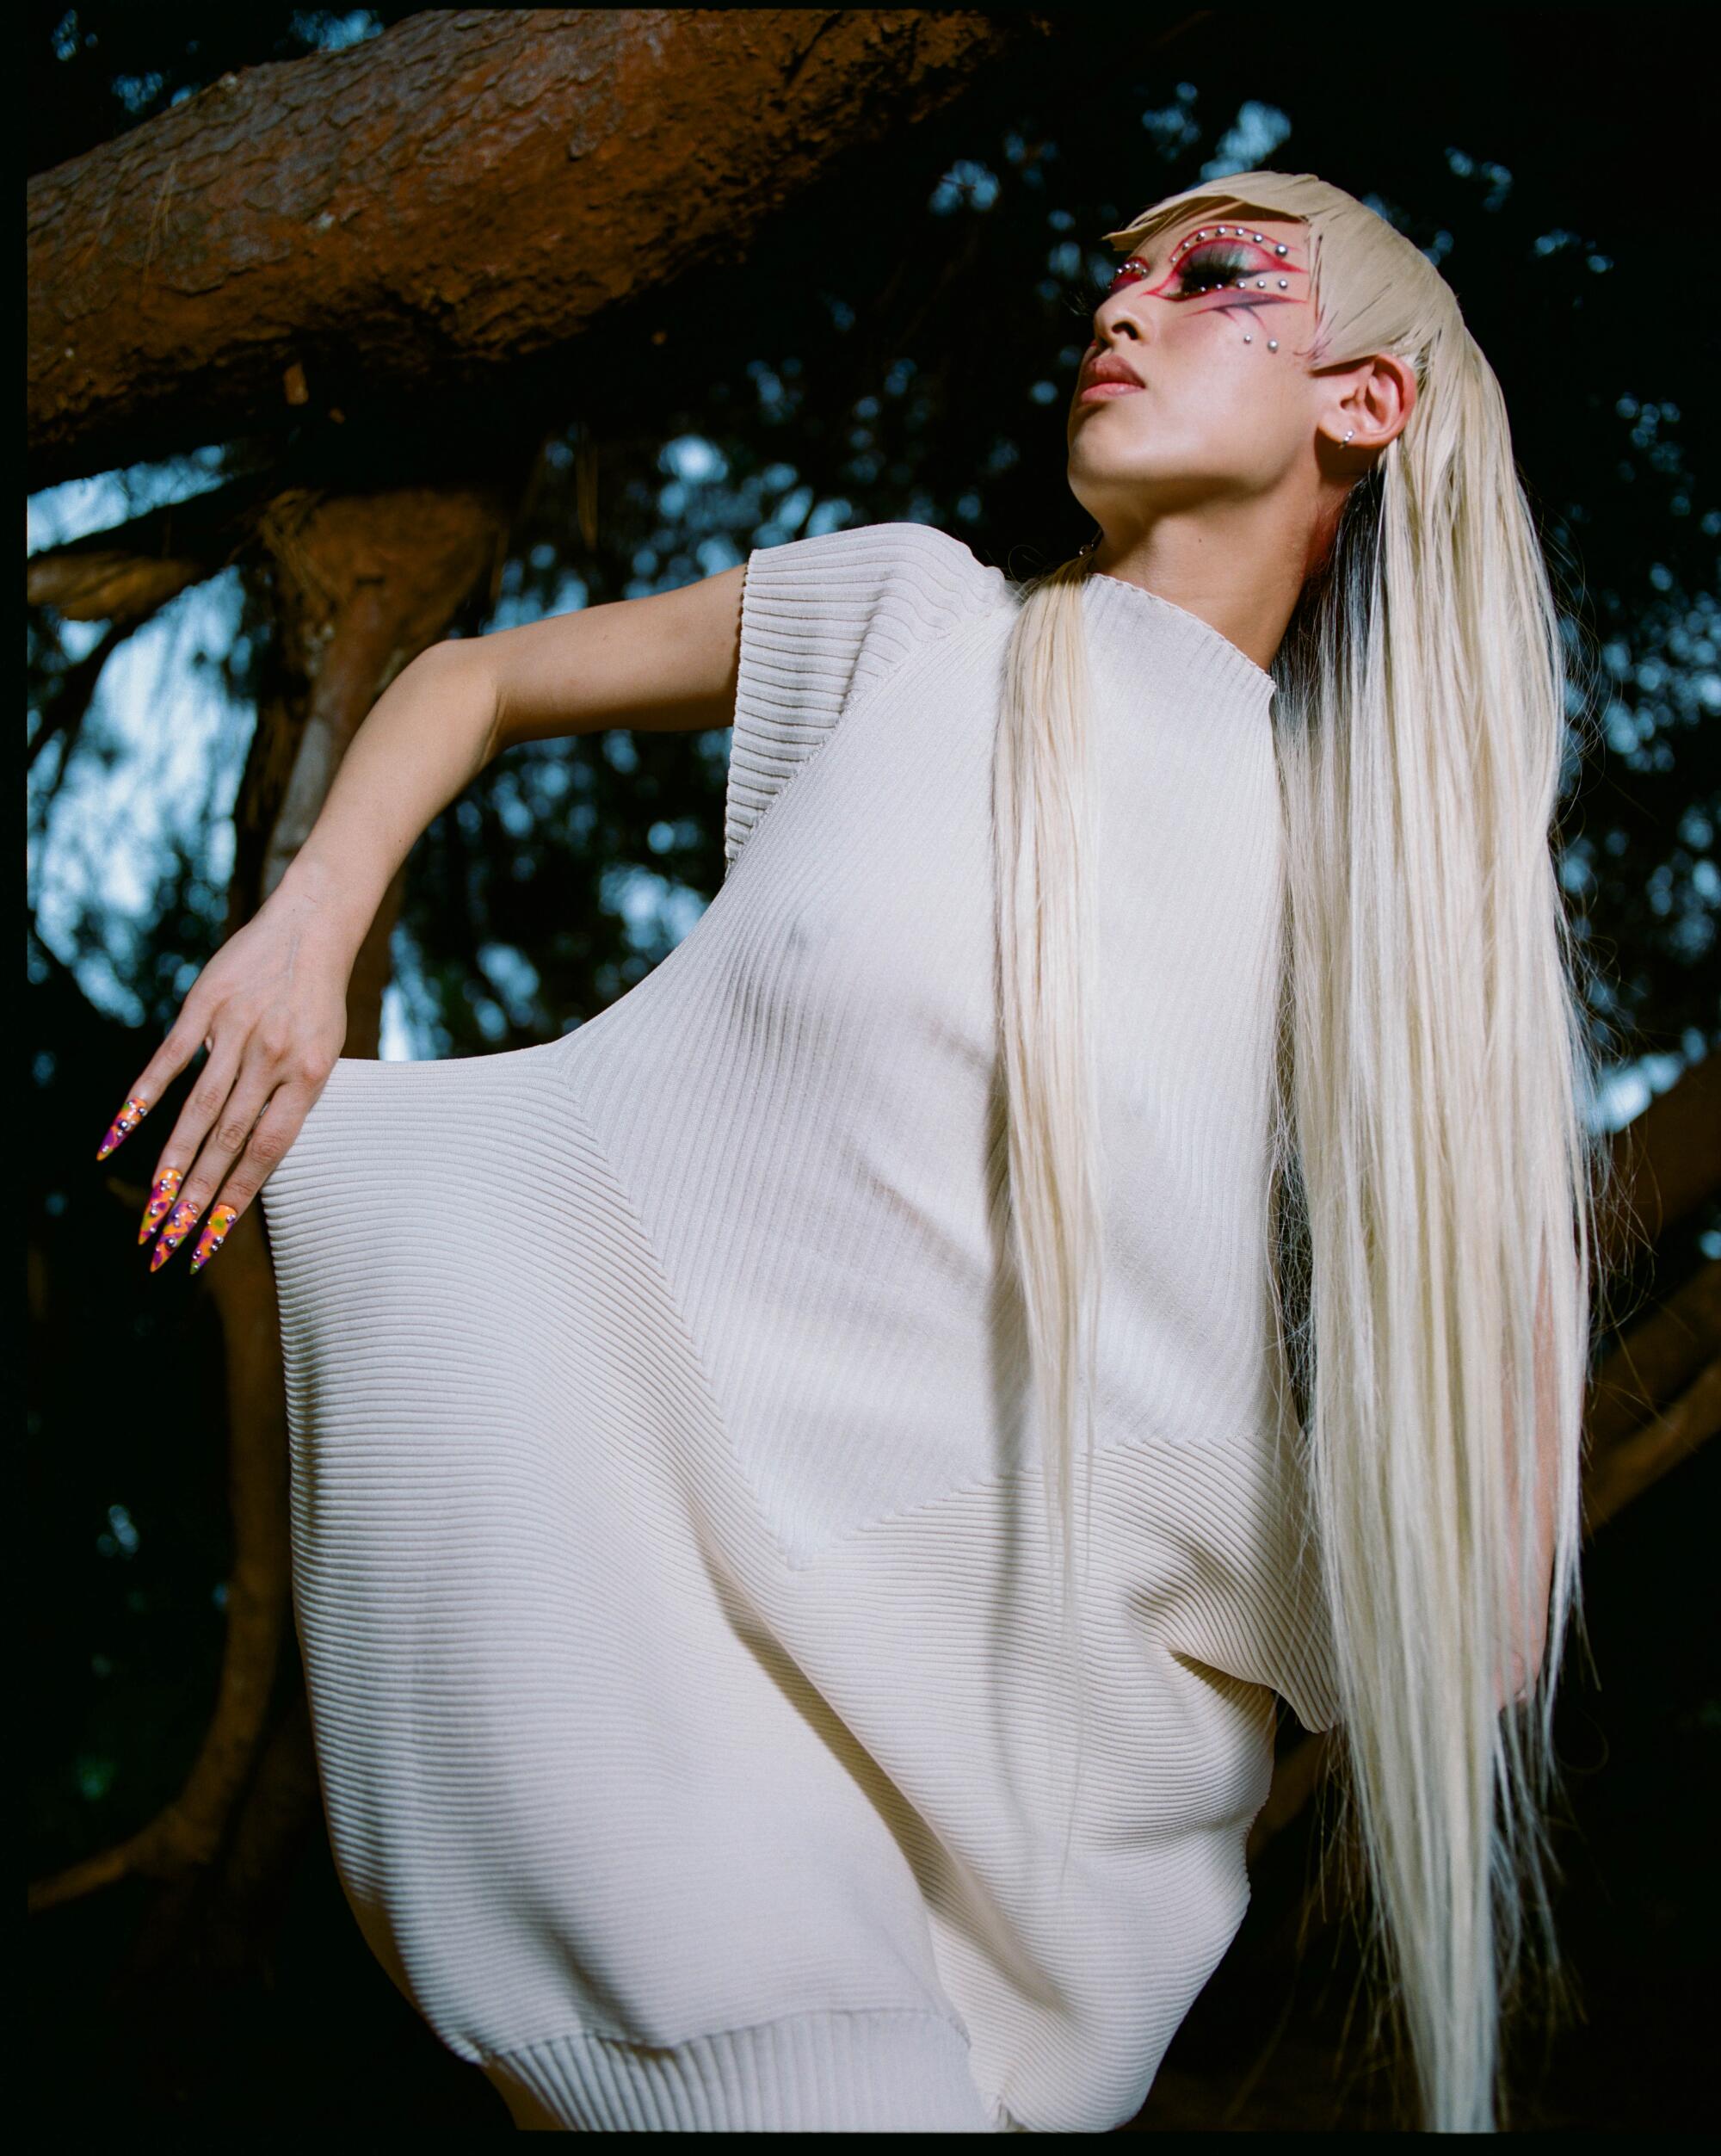 A closer view of a person with long white-blond hair standing outside in a white Issey Miyake outfit.